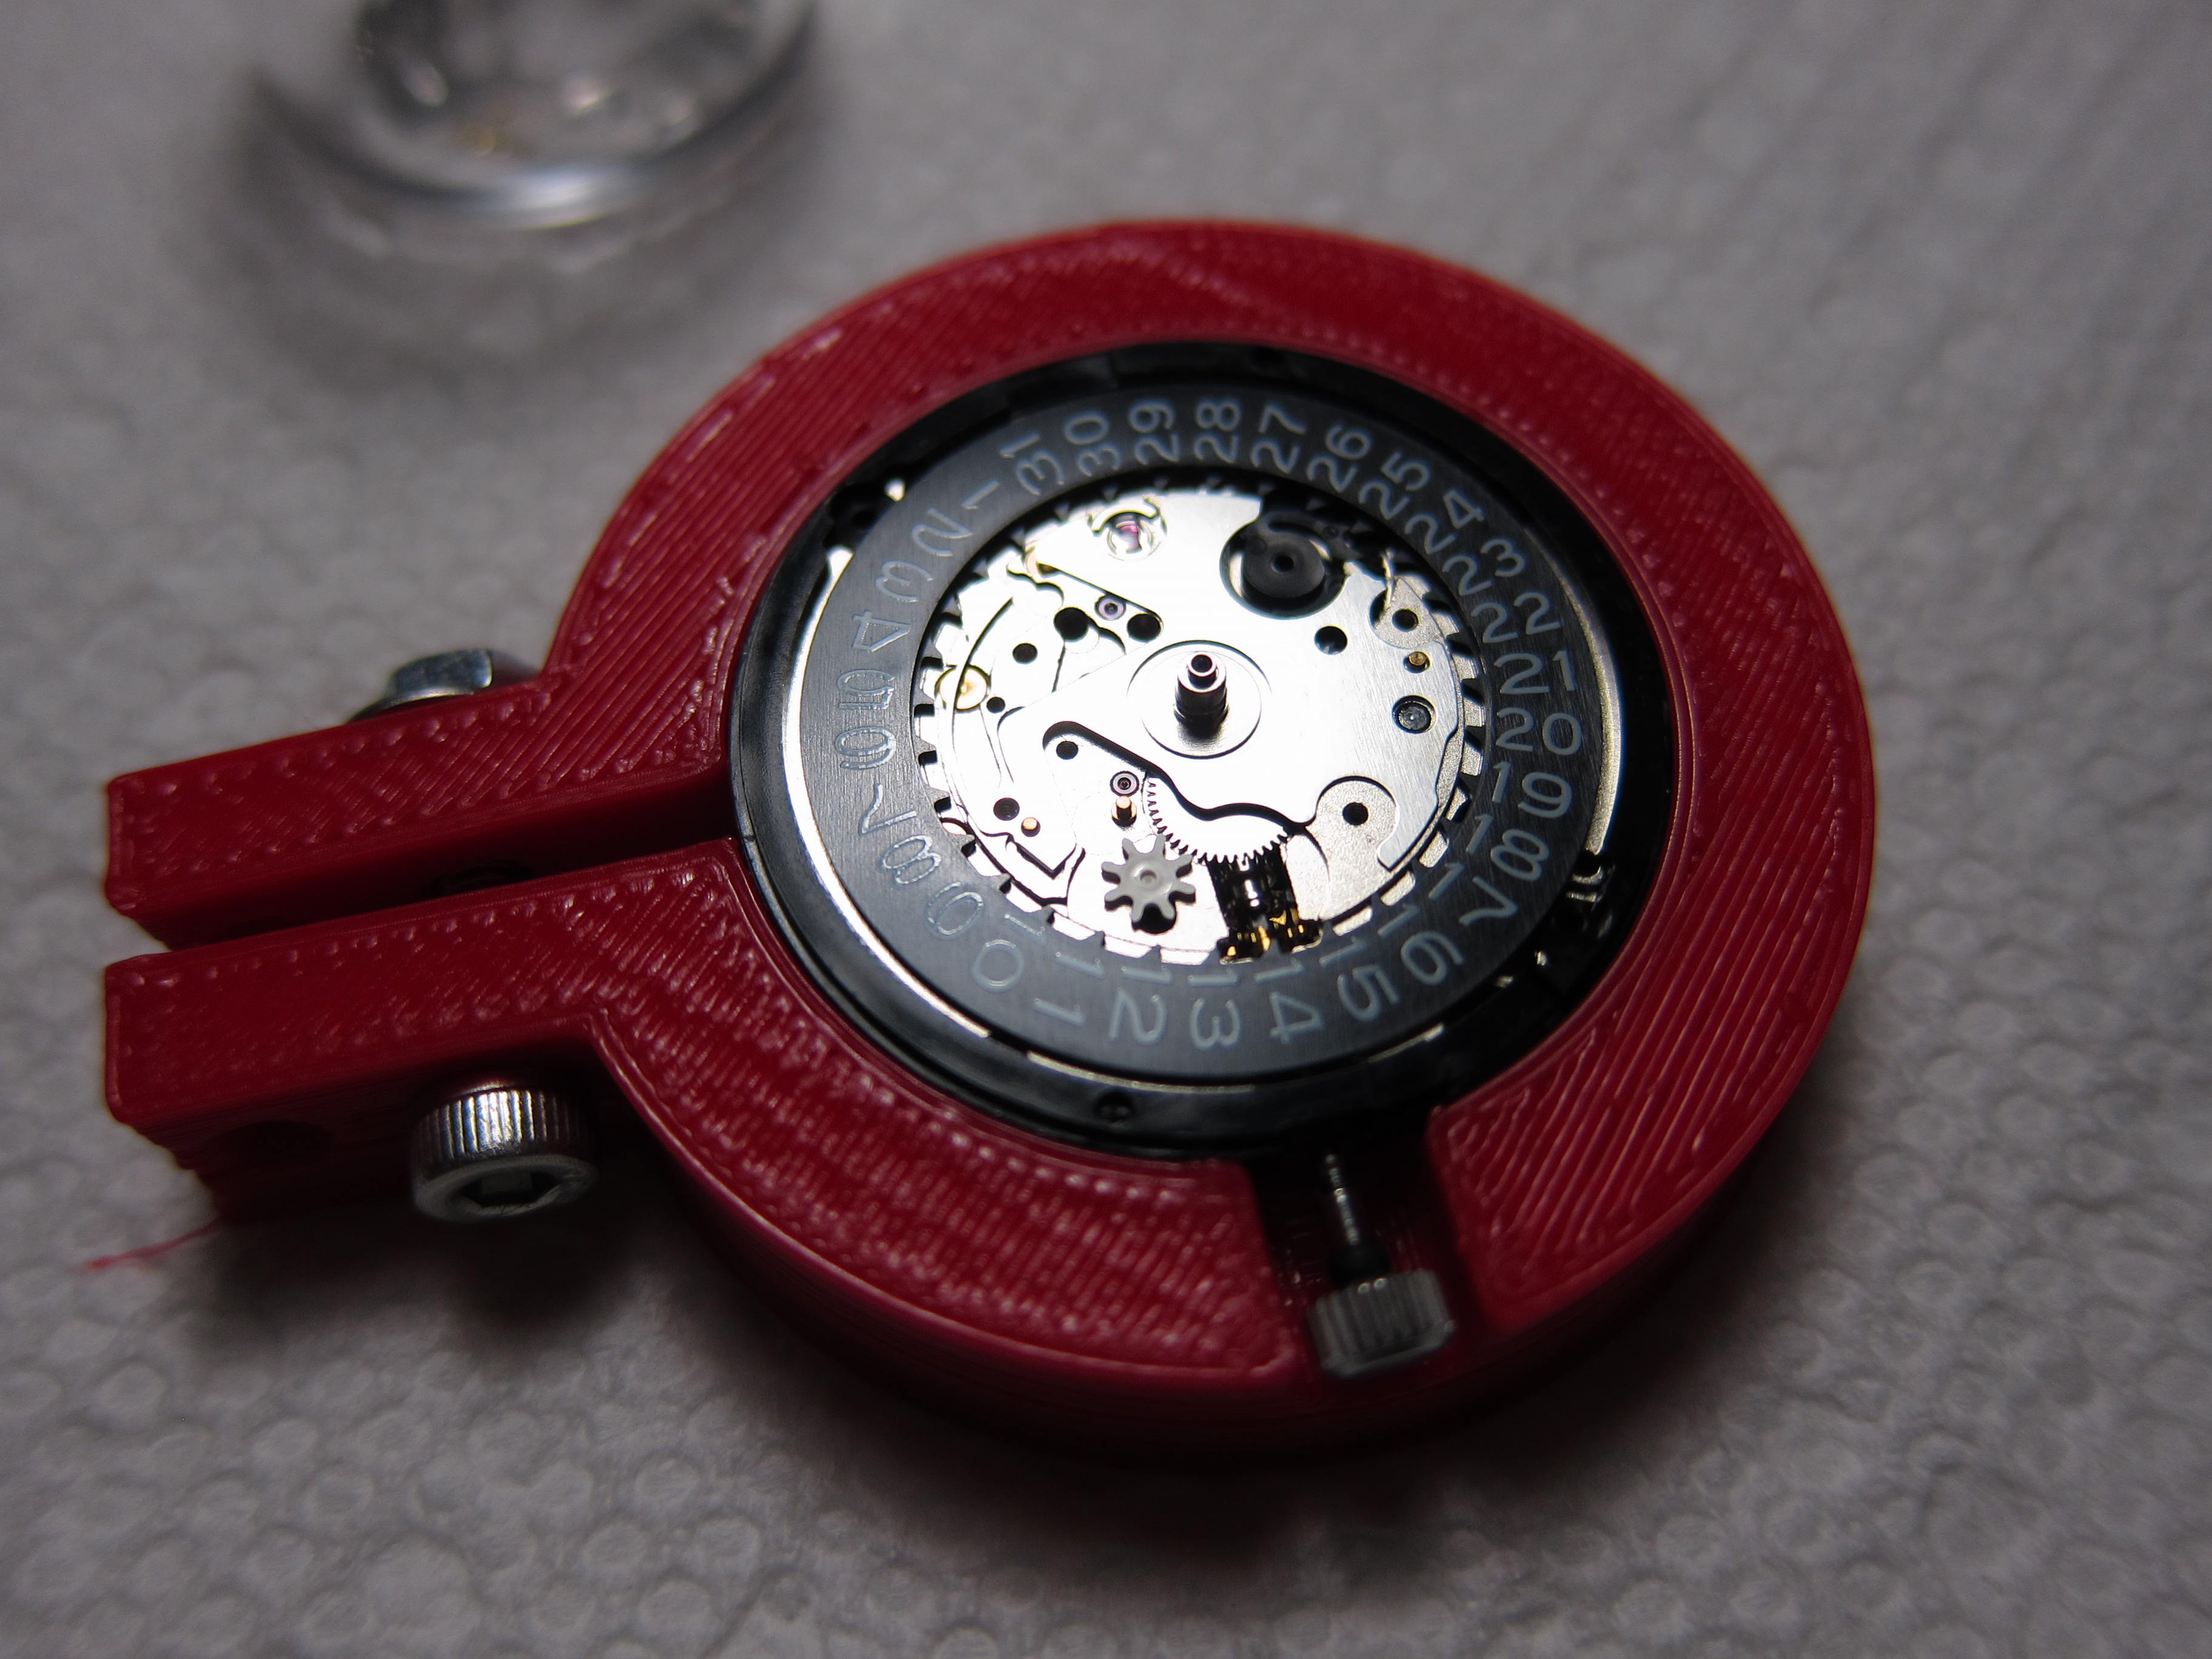 Disassembly of the Seiko 7S26 | coordinatedmotion